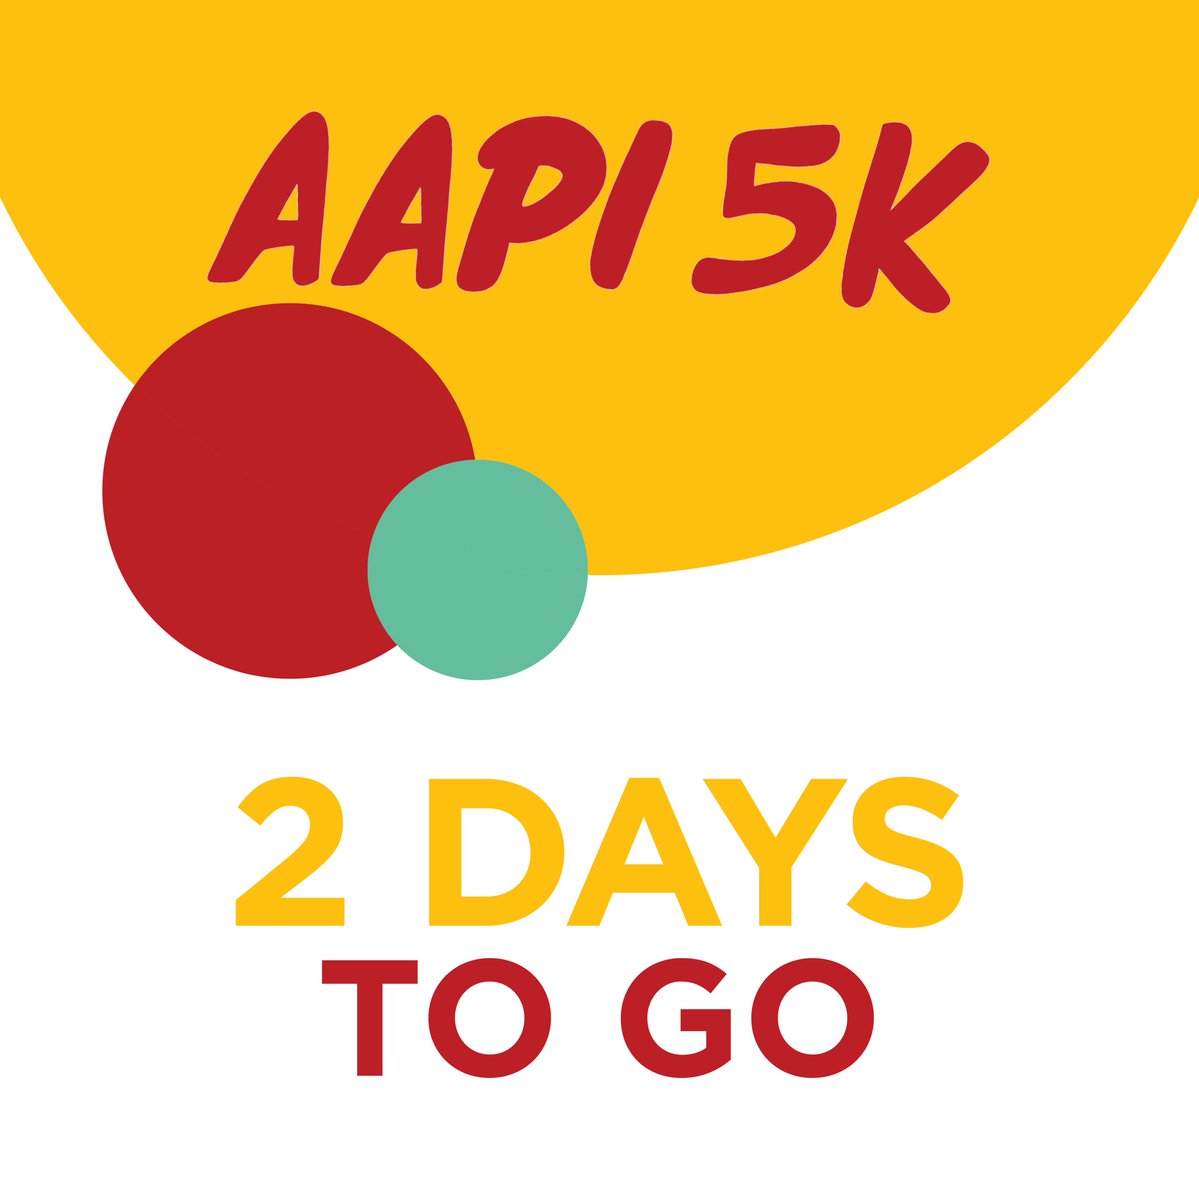 TWO MORE DAYS to go before the 2024 NYC AAPI 5K on 5/12! Who is excited!? Over 450 participants registered. Today’s the final day to join. Sign up at aaari.info/24-05-12aapi/ #AAPI5K #NYCAAPI5K